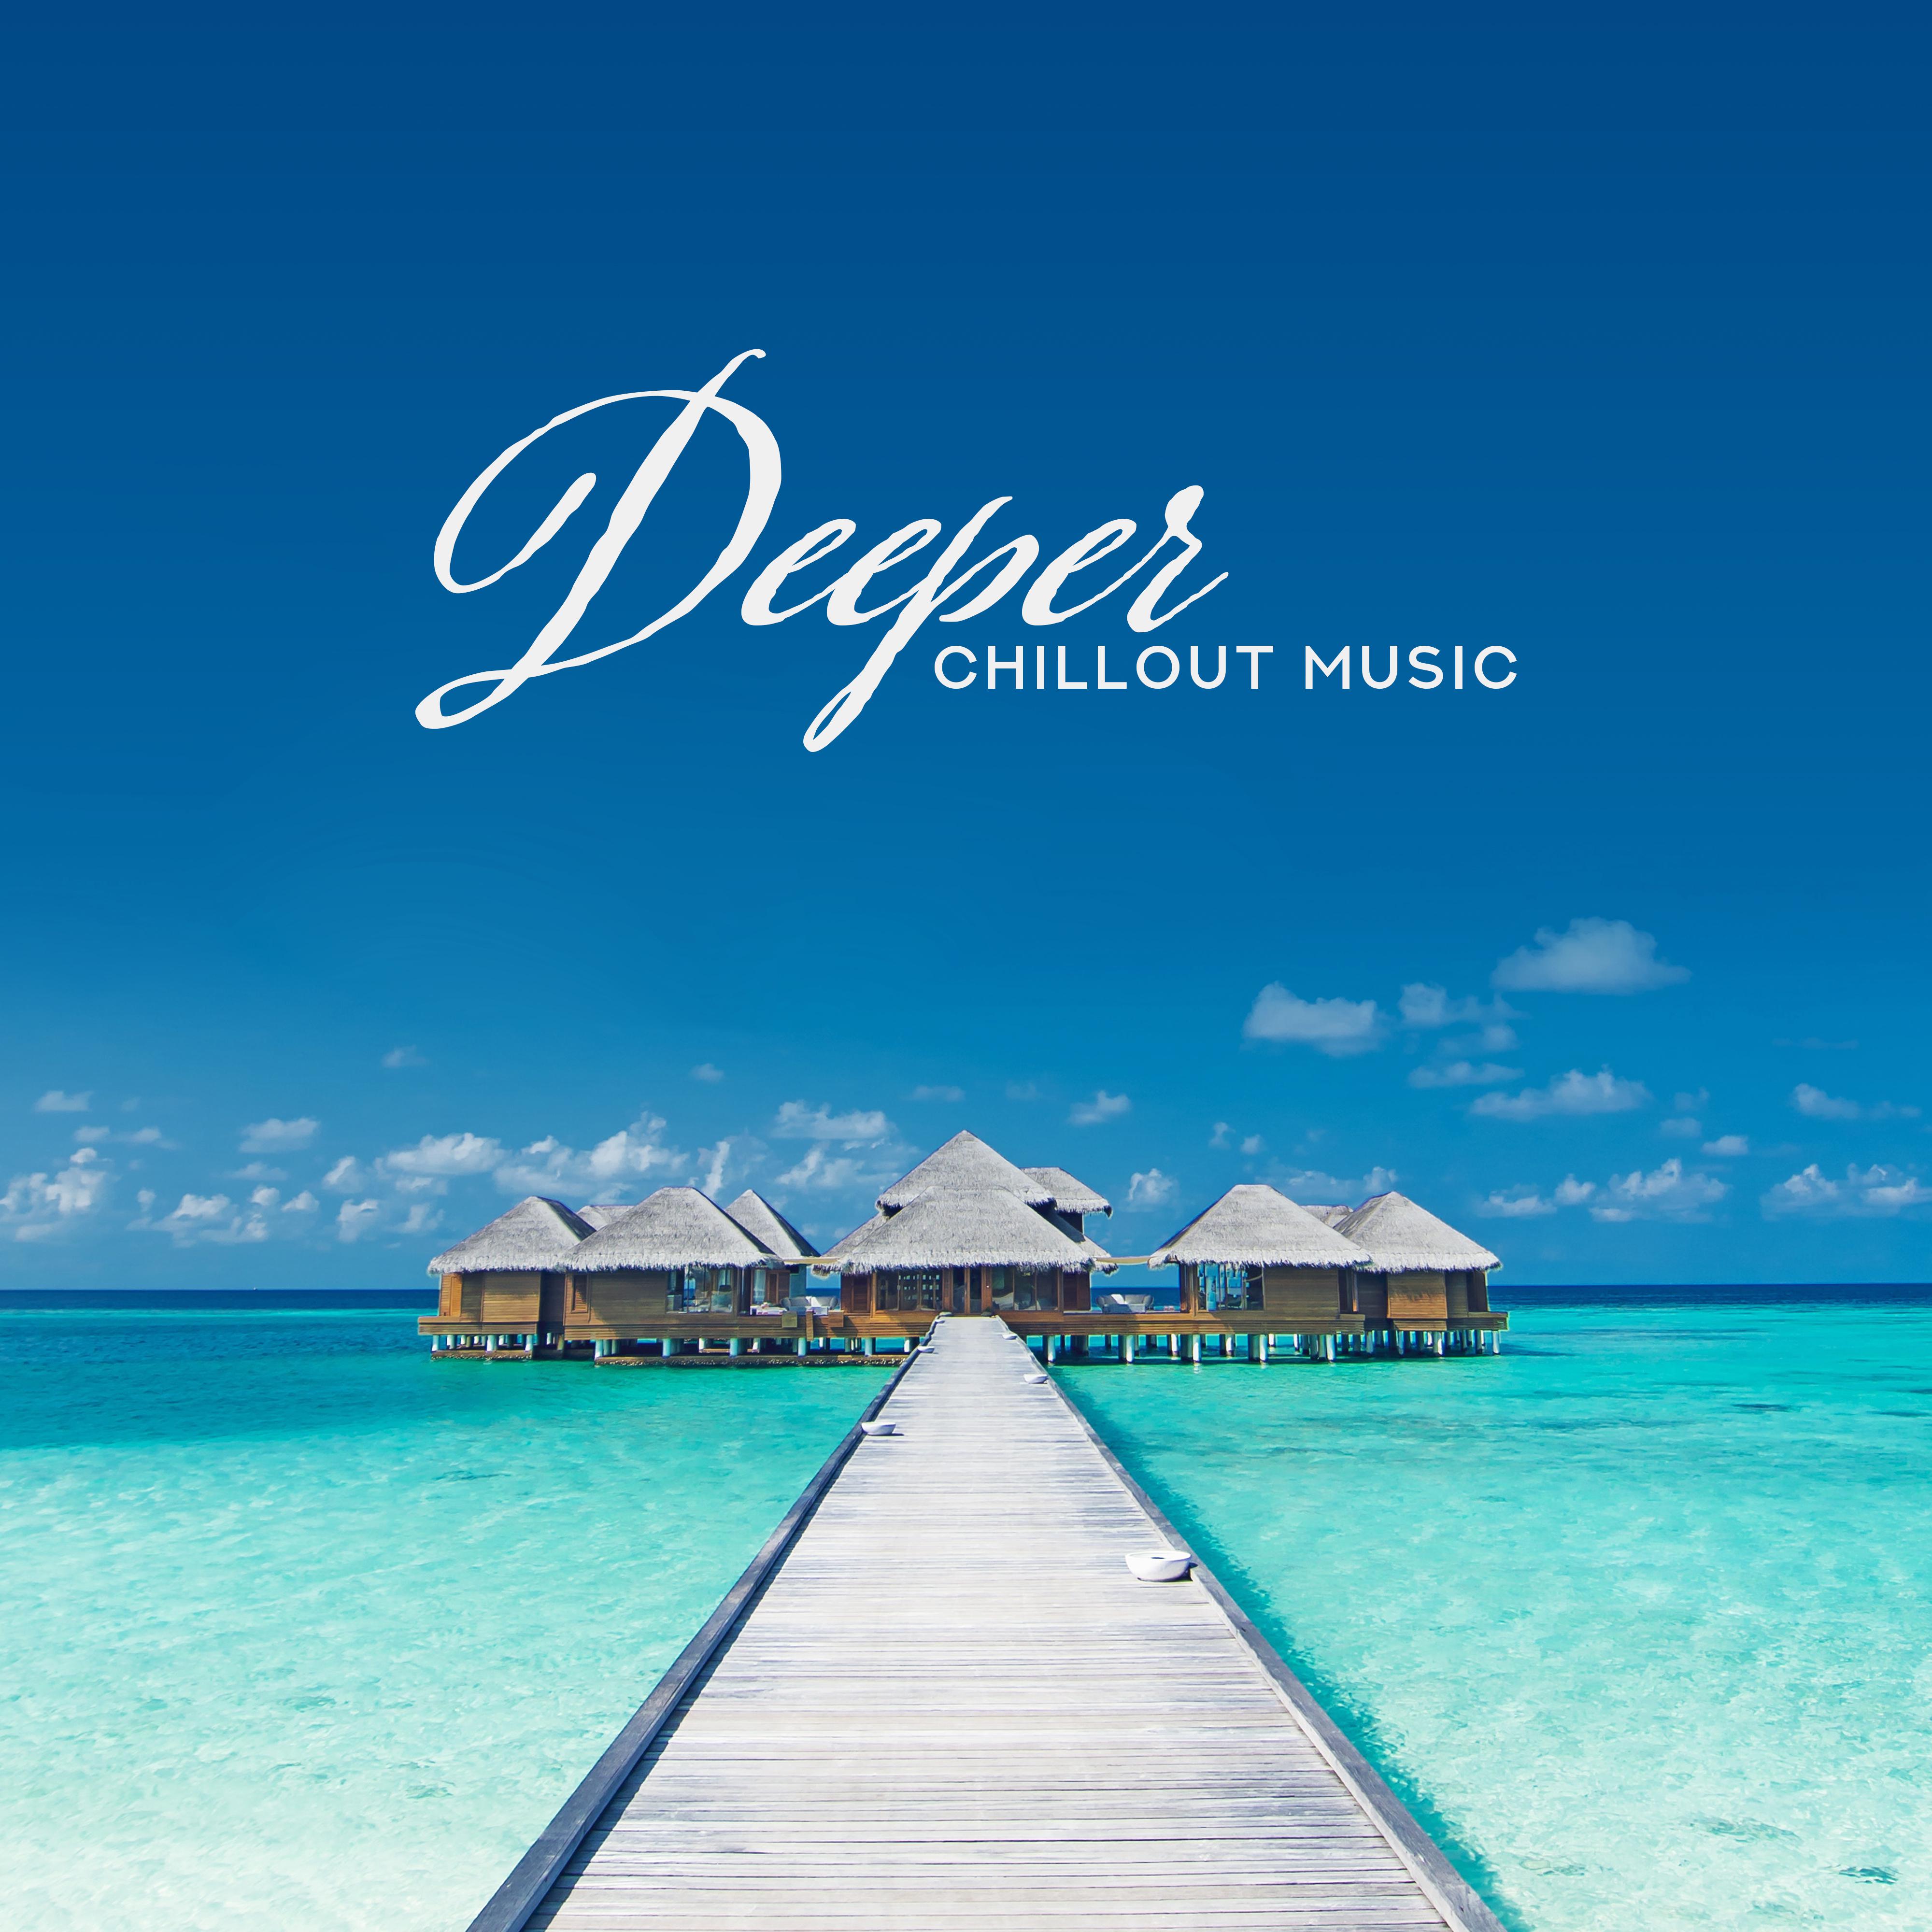 Deeper Chillout Music: Musical Mix of Deeply Relaxing Chillout Rhythms with Ambient Music